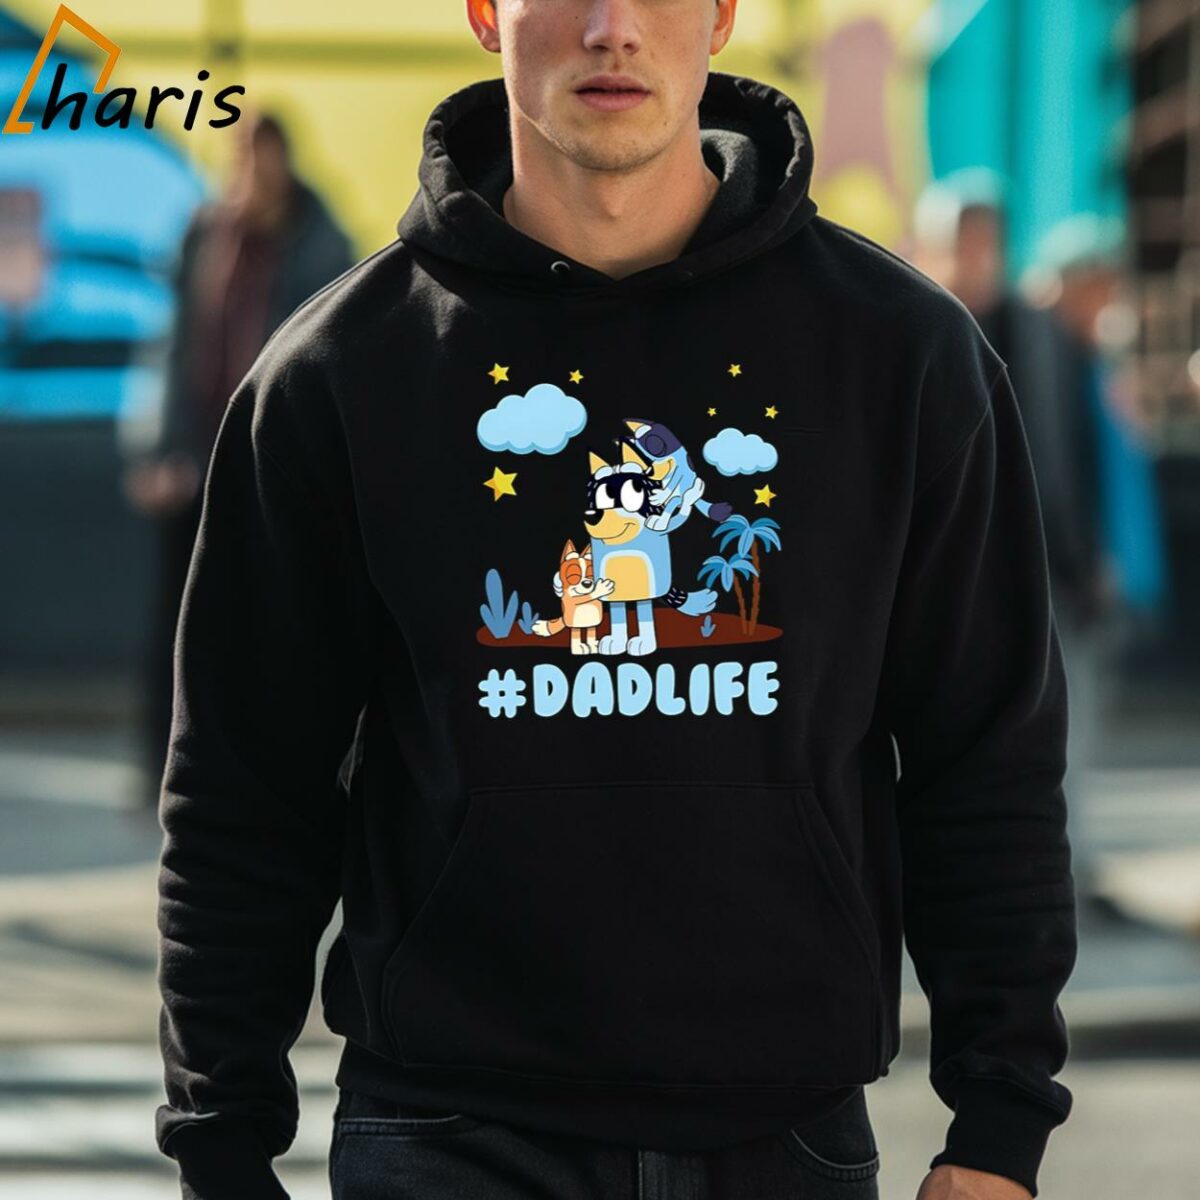 Bluey Dadlife Funny Gift for Camping Crew Dad Shirt 3 hoodie